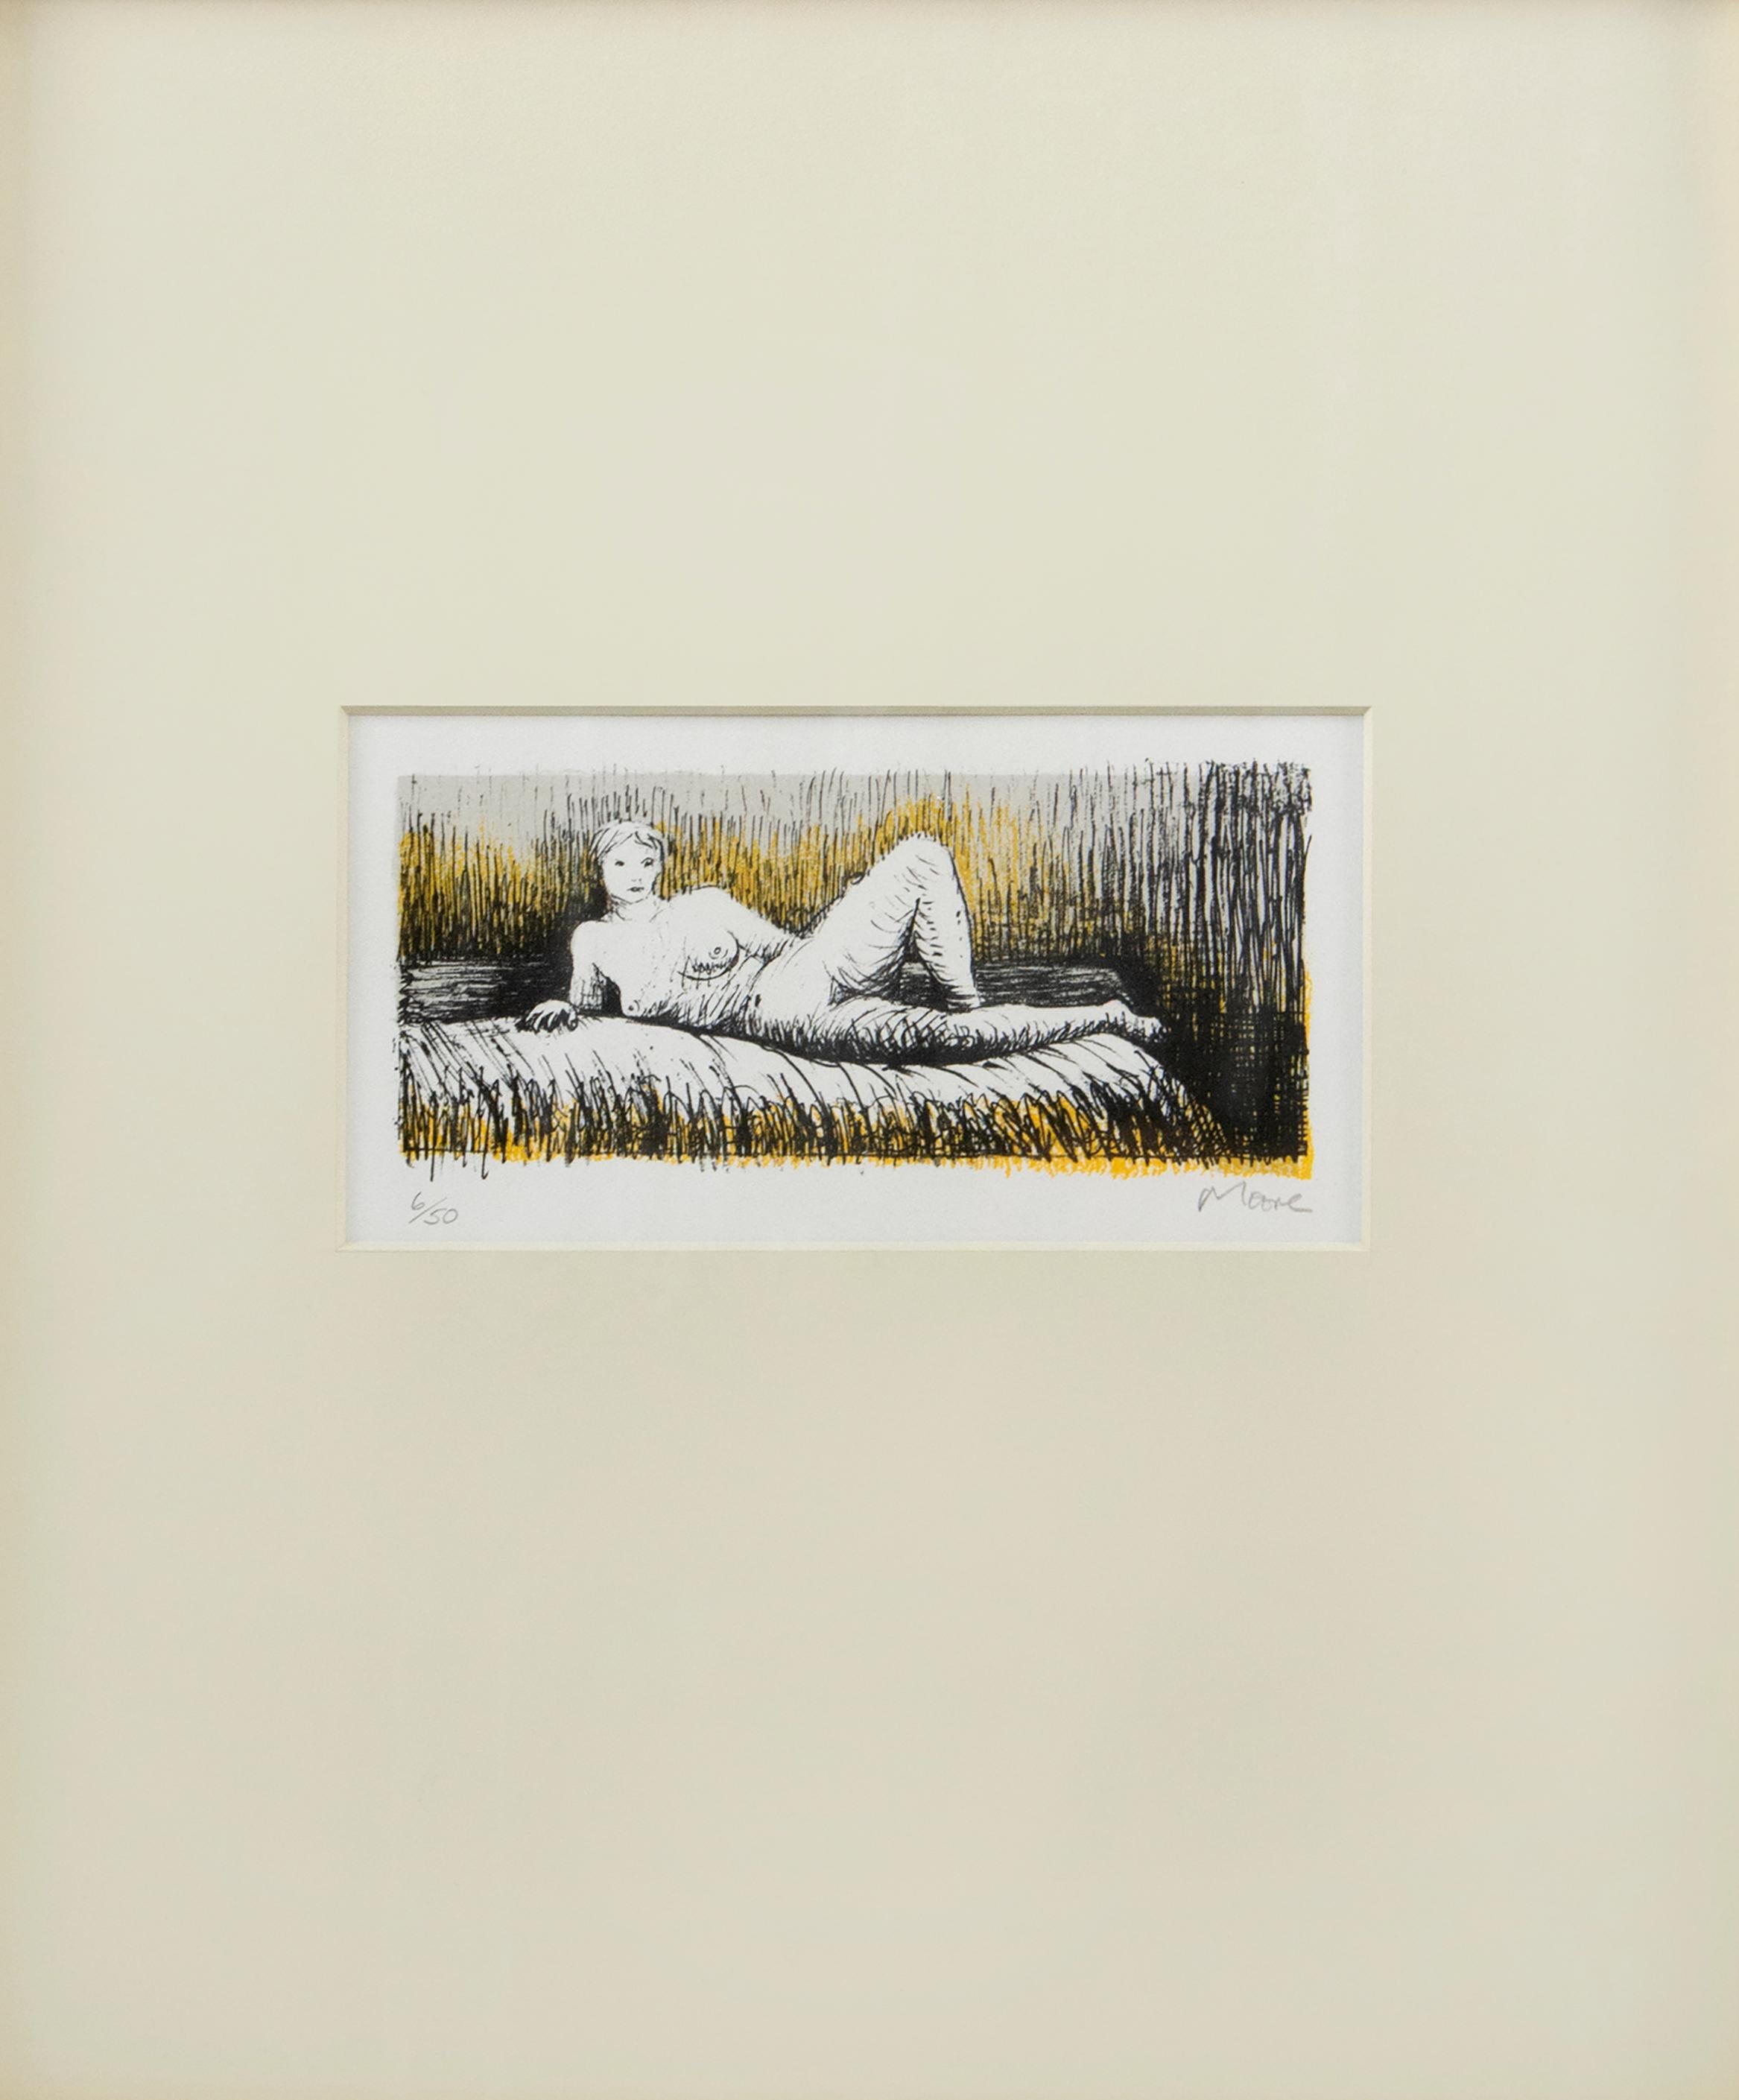 Lithograph in colours, 1974, signed in pencil and numbered from the edition of 50 (there were also ten artist's proof and ten hors commerce), published by Henry Moore, 41 x 34 cm. (16 x 13.4 in.) 
